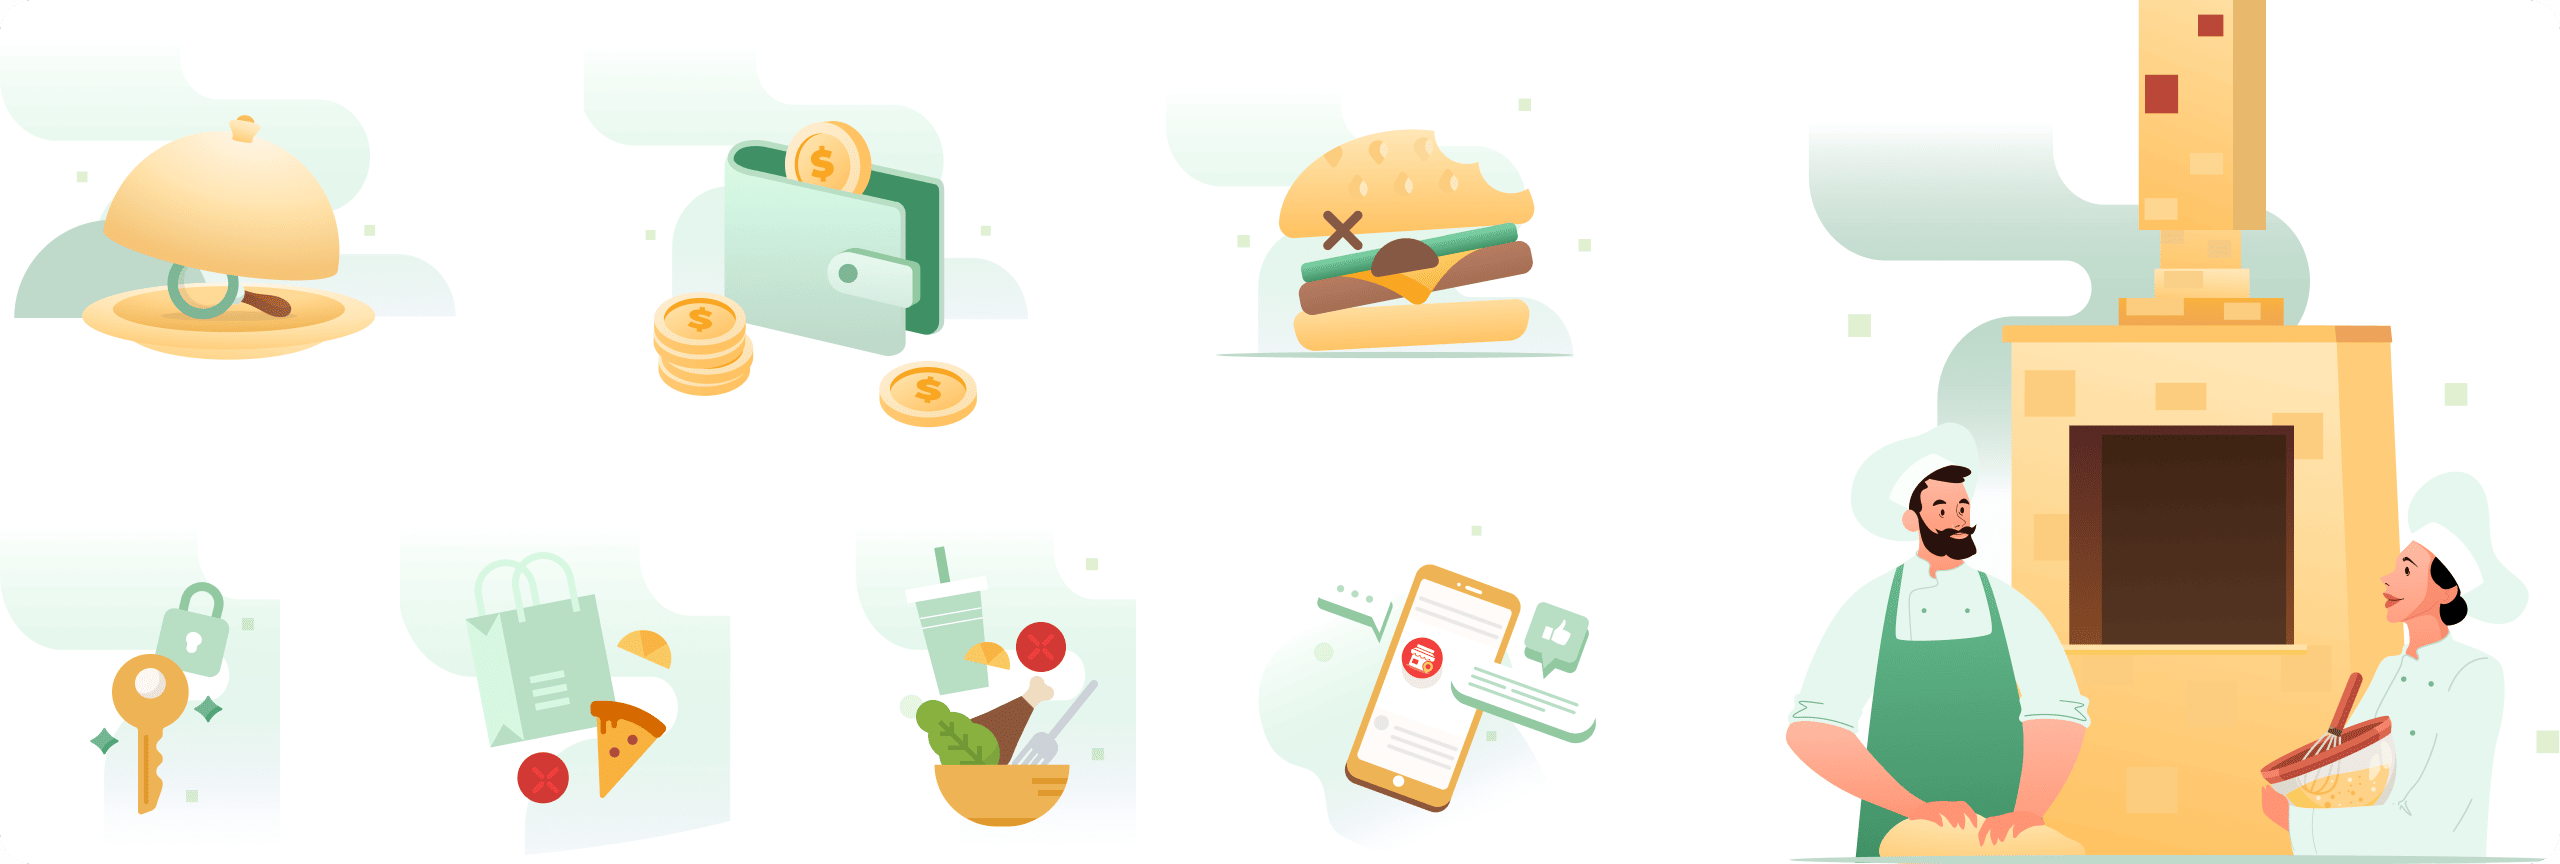 1112 delivery app illustrations